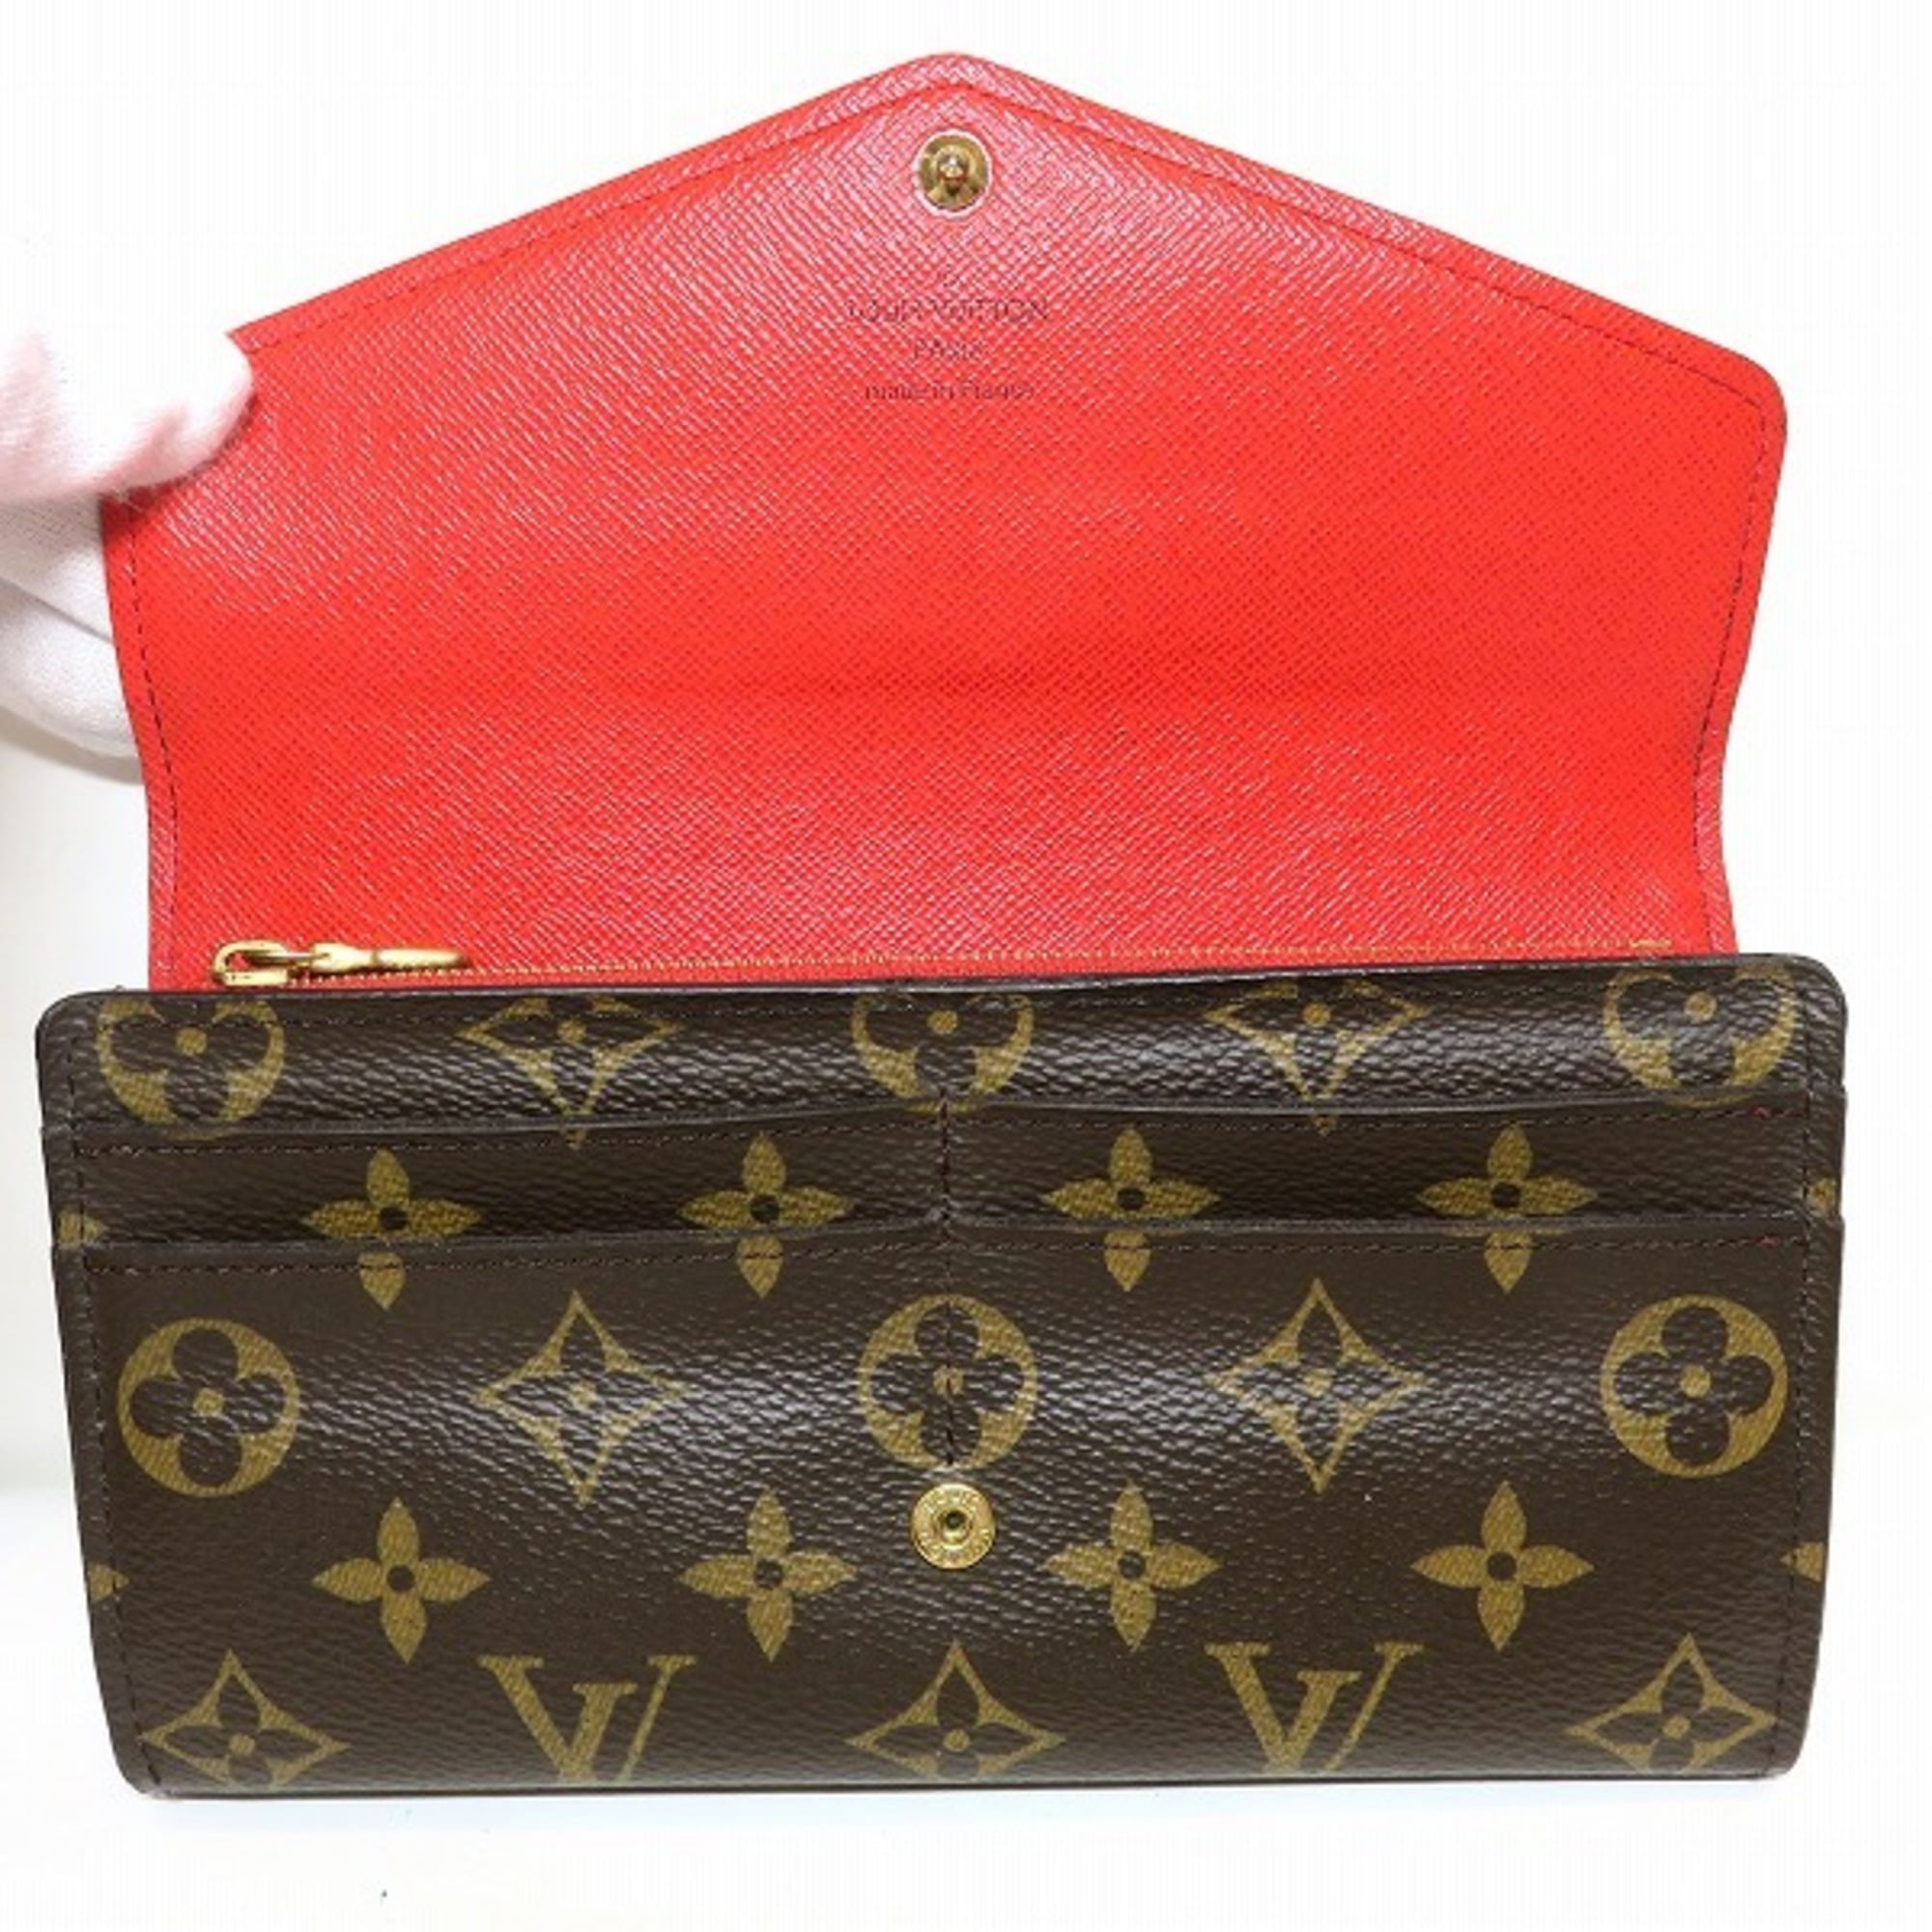 Authenticated Used Louis Vuitton LOUIS VUITTON Monogram Portefeuille Sarah  Long Wallet with Hook Fuchsia Red M62234 